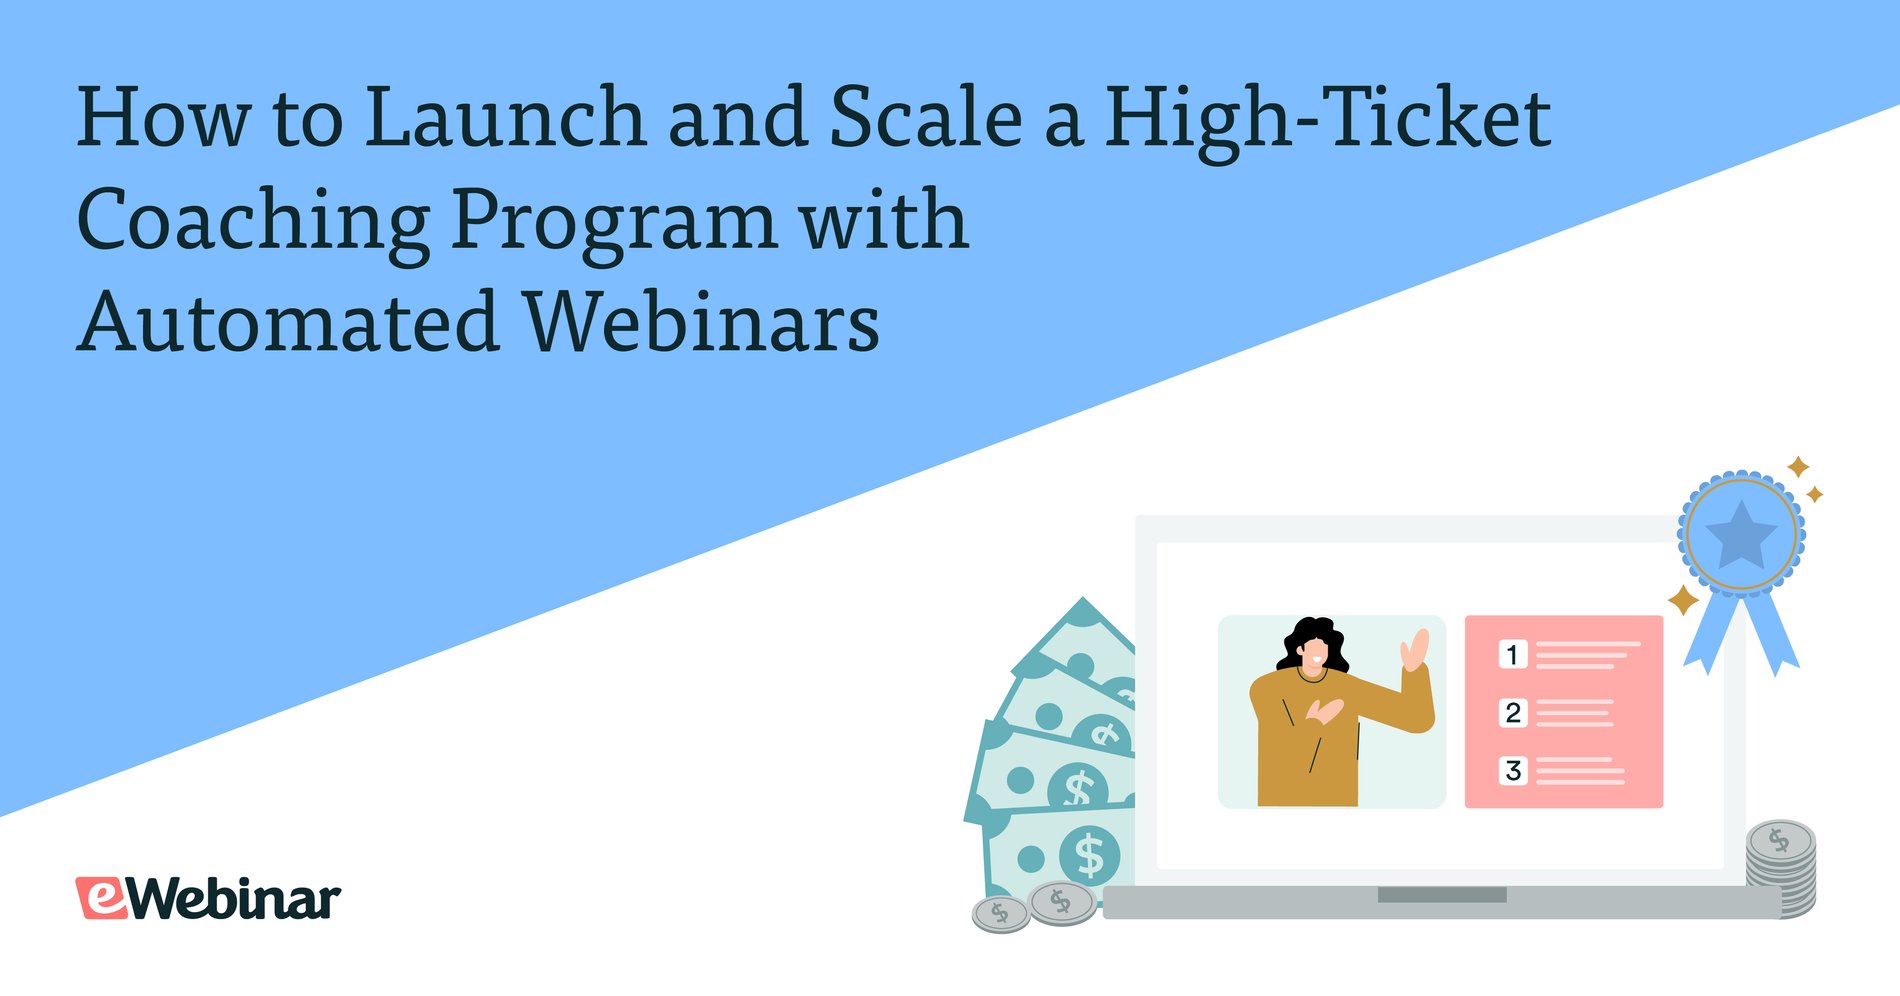 How to Launch and Scale a High-Ticket Coaching Program with Automated Webinars